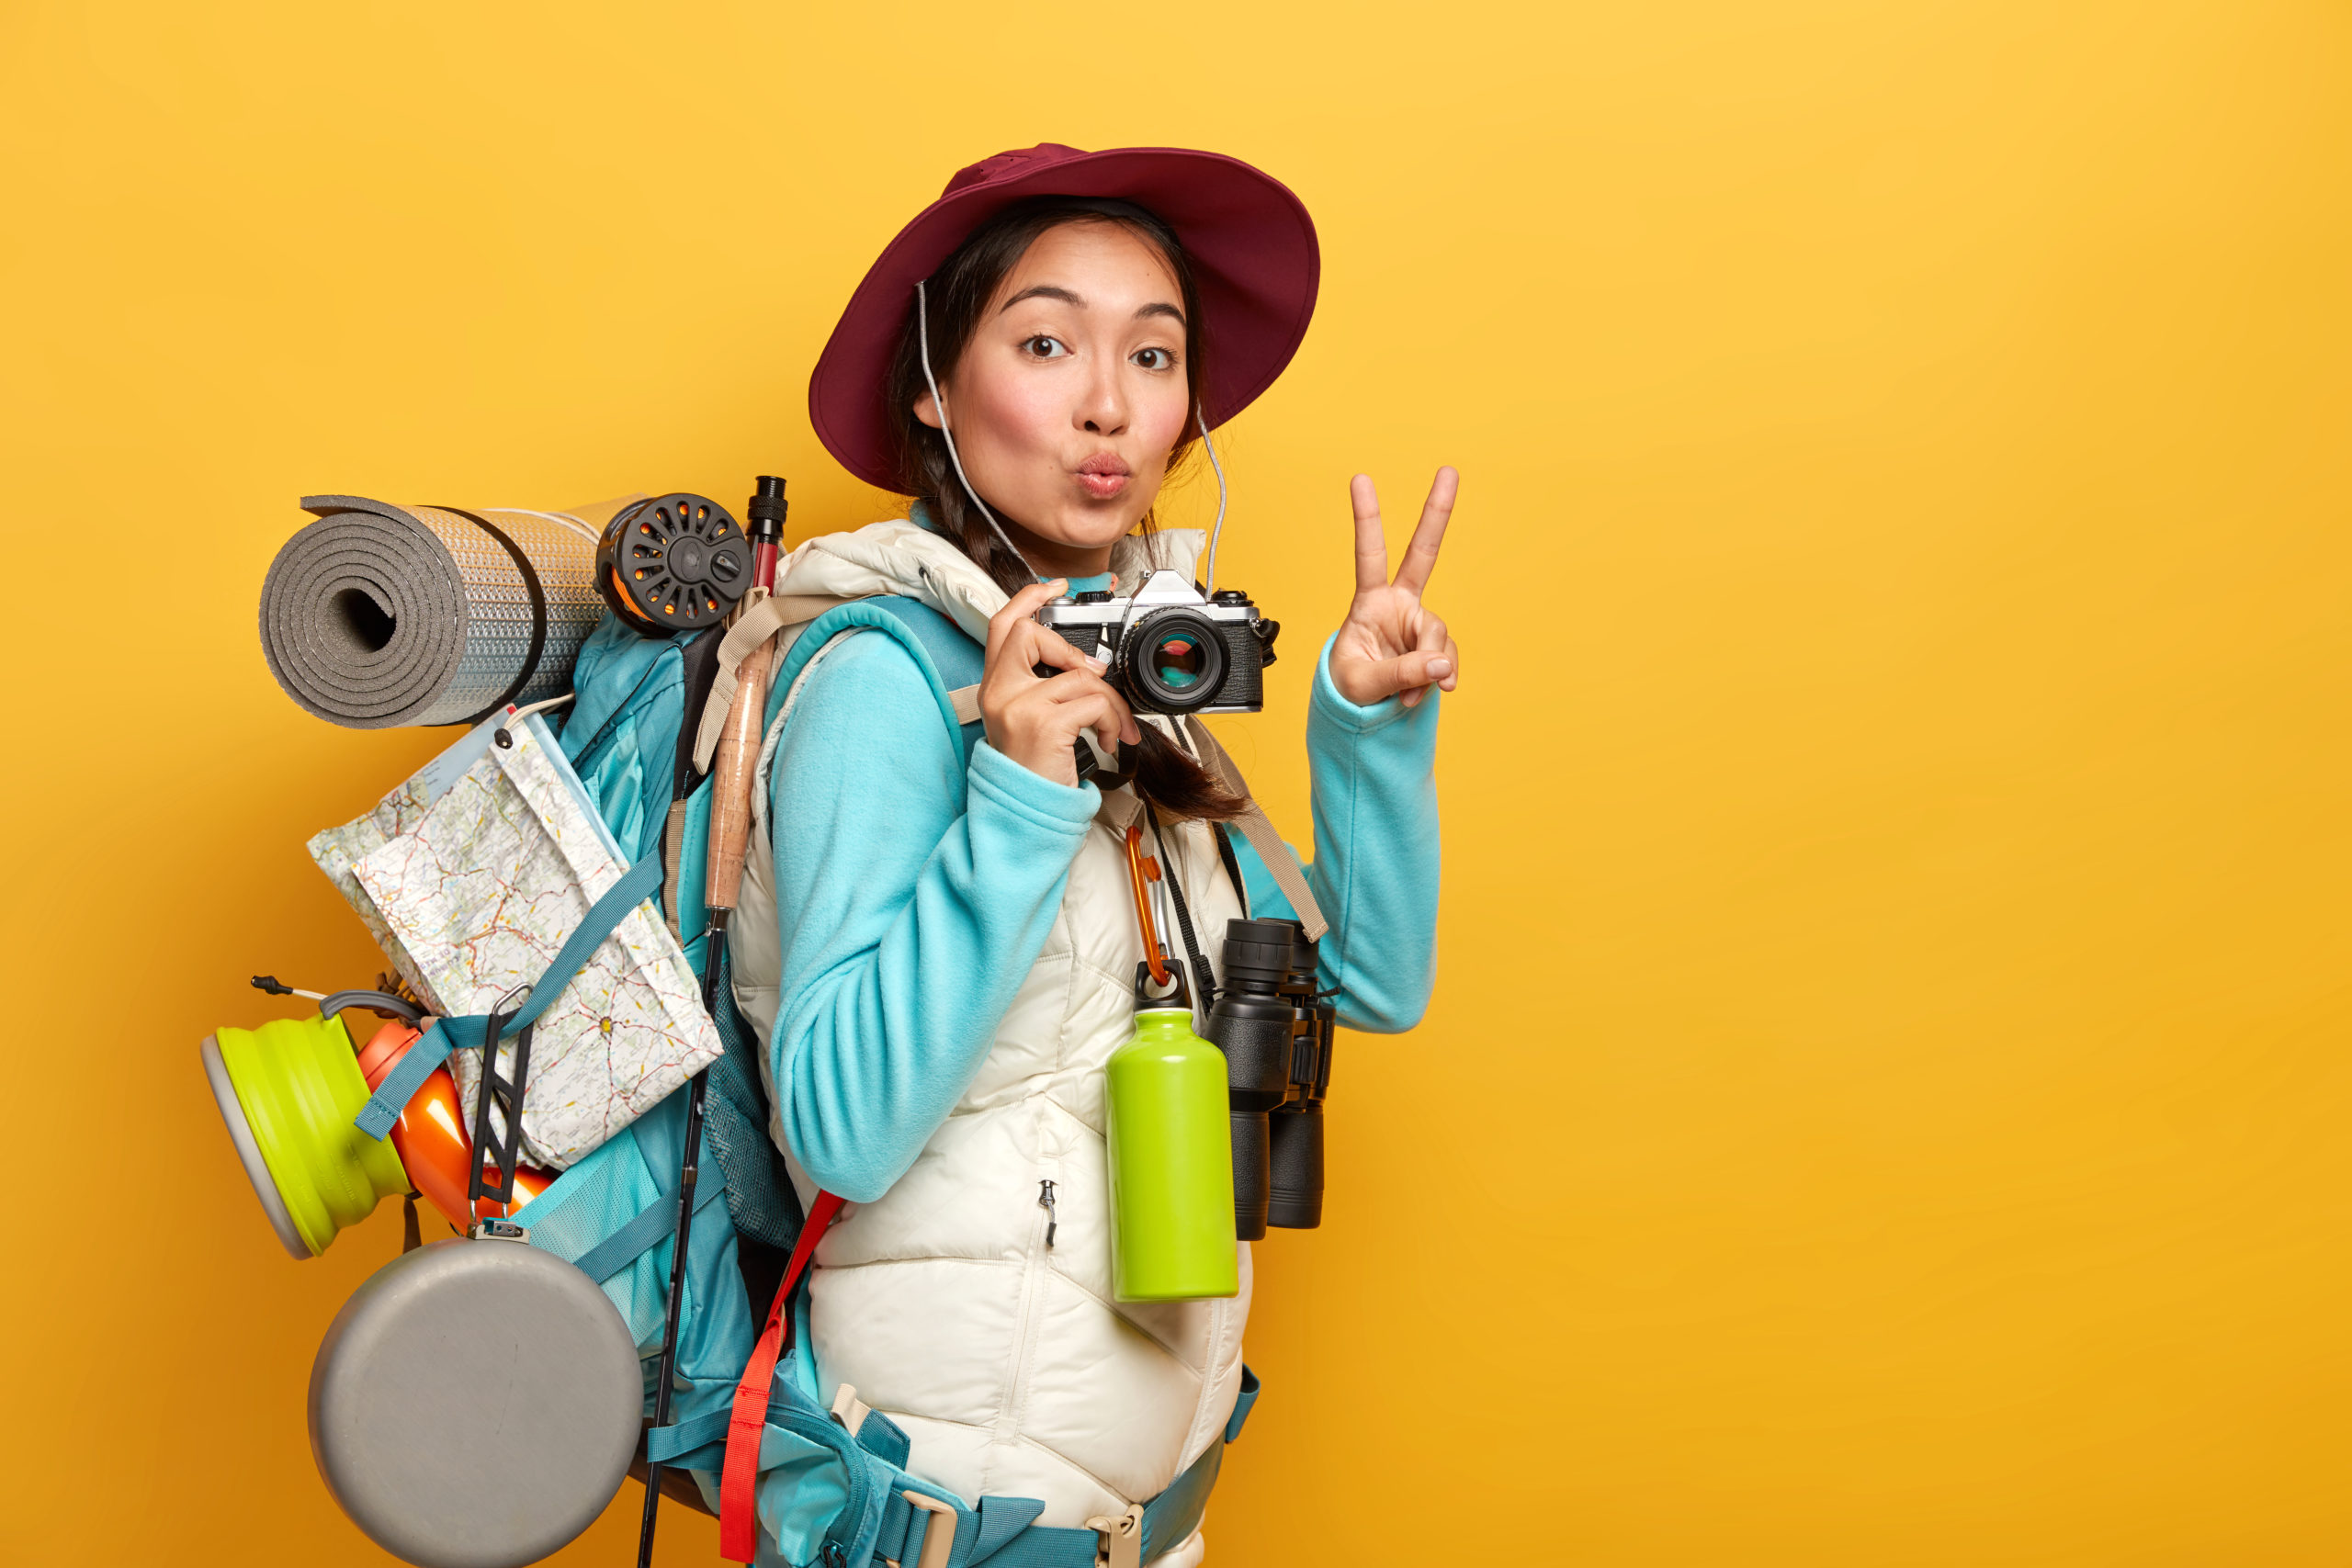 pretty active backpacker makes victory gesture keeps lips rounded holds retro camera stands with travelbag takes photos during trip isolated over yellow background scaled